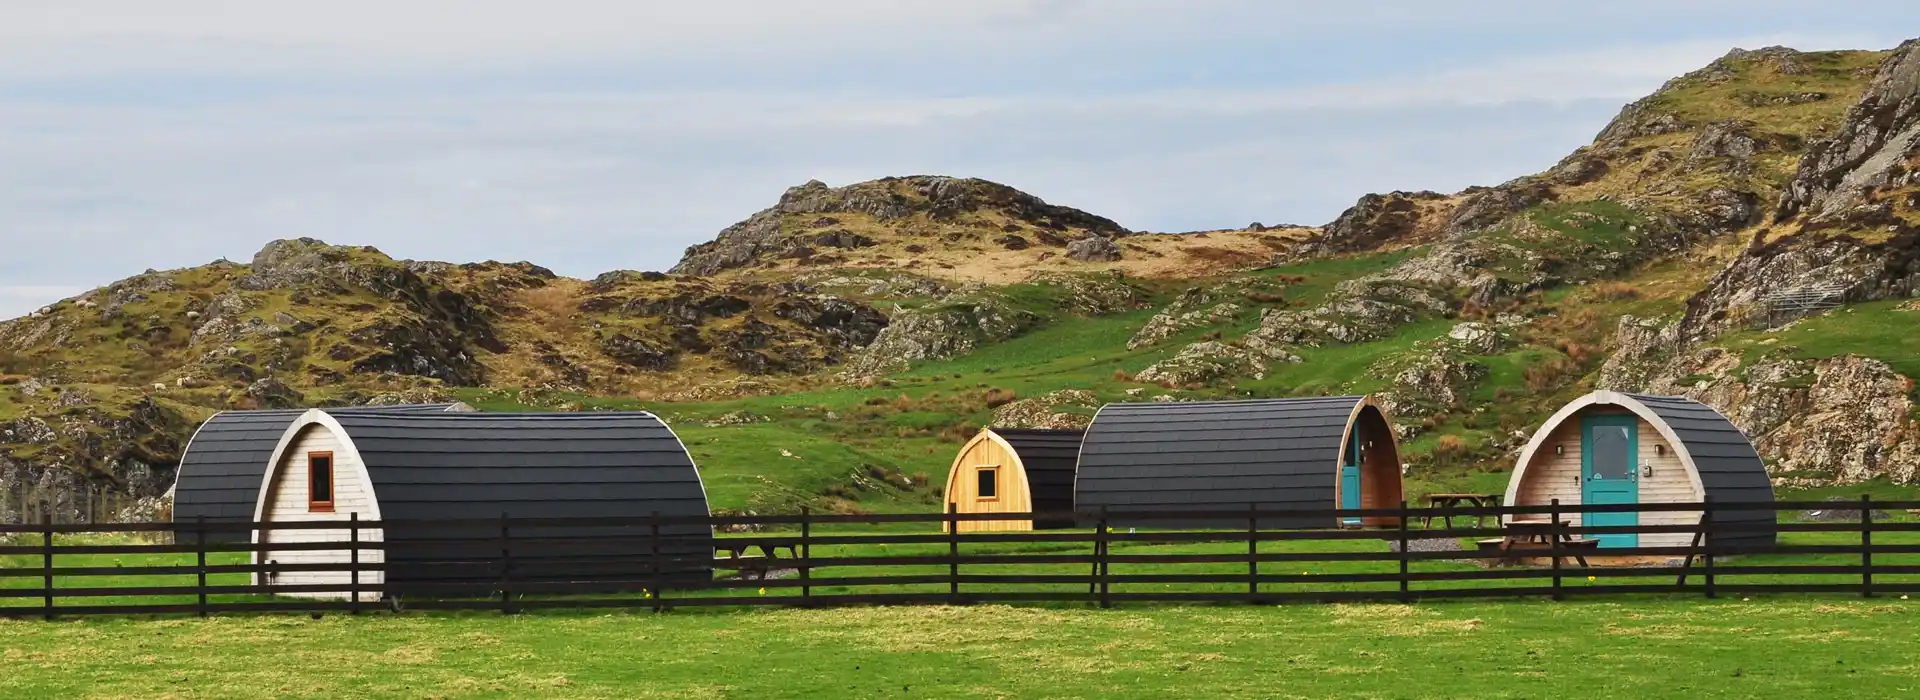 Glamping in Northern Ireland